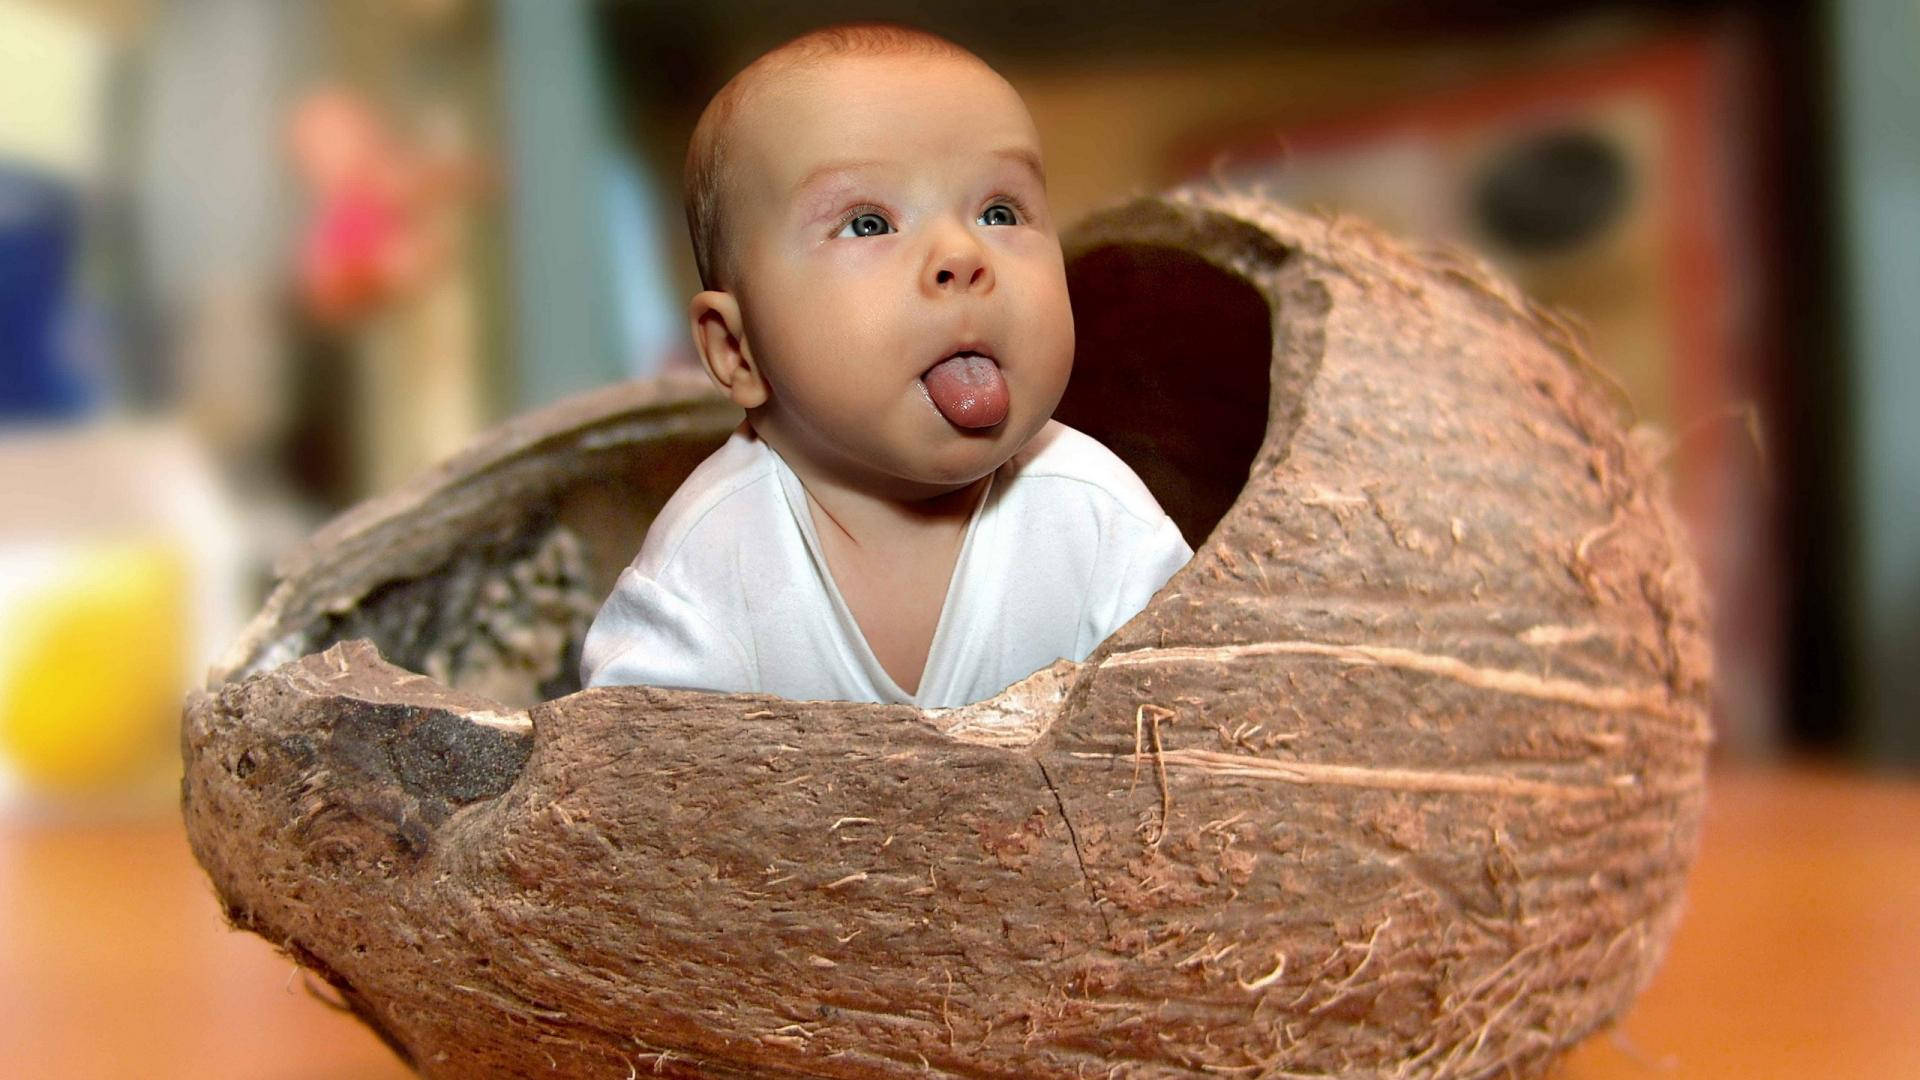 "Tropical Tots: Hilarious Moment of Cute Baby in a Coconut Shell" Wallpaper